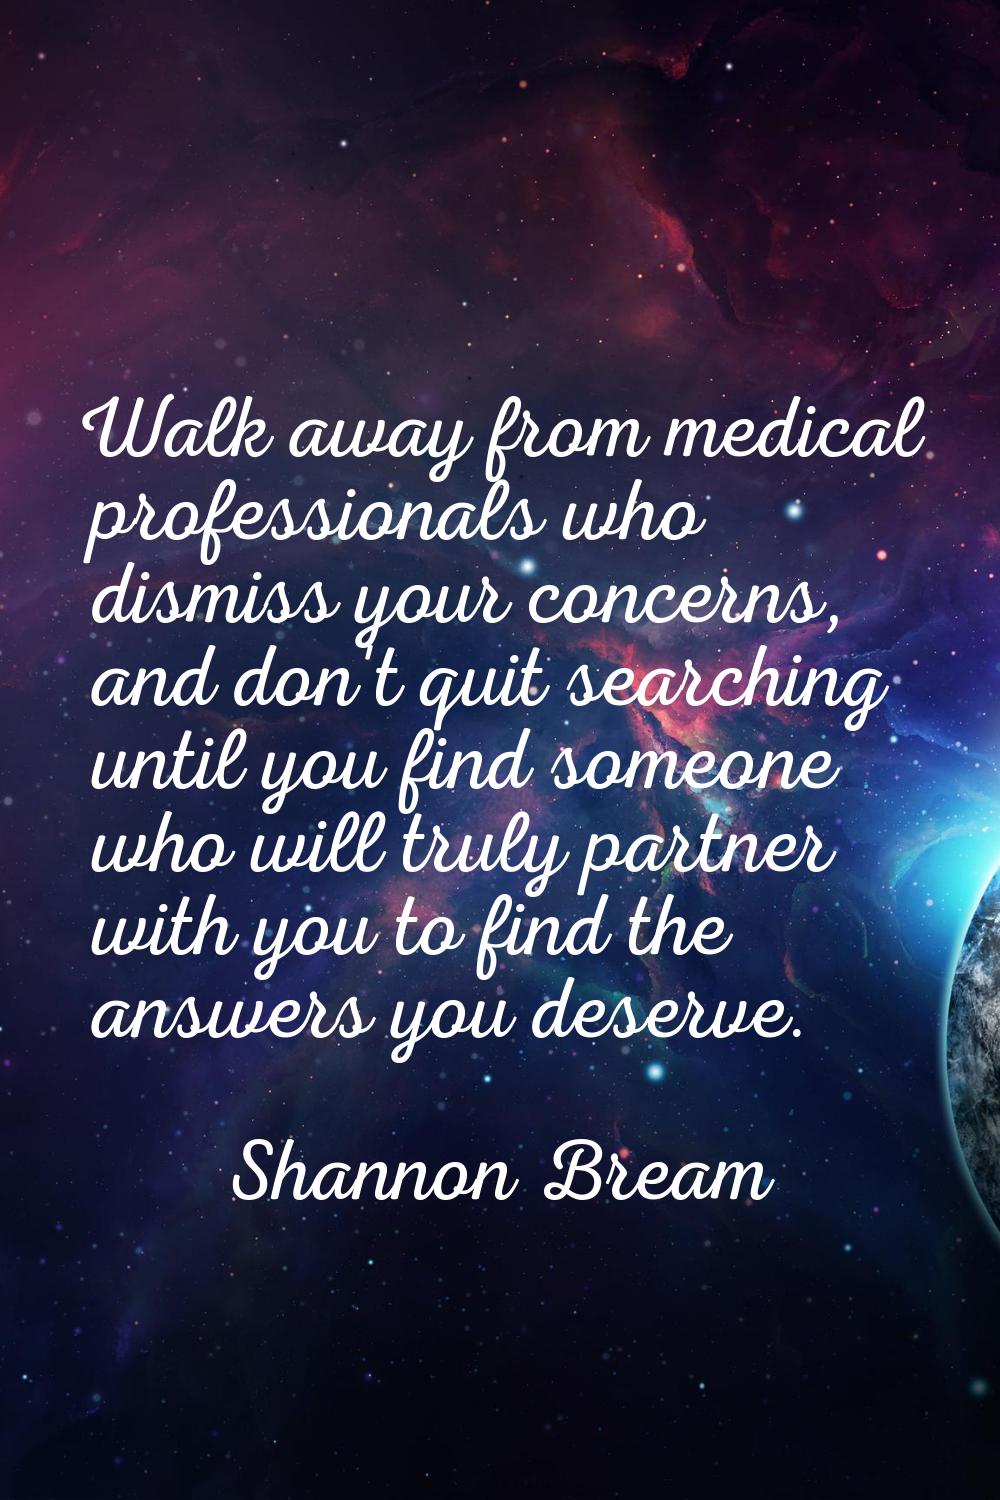 Walk away from medical professionals who dismiss your concerns, and don't quit searching until you 